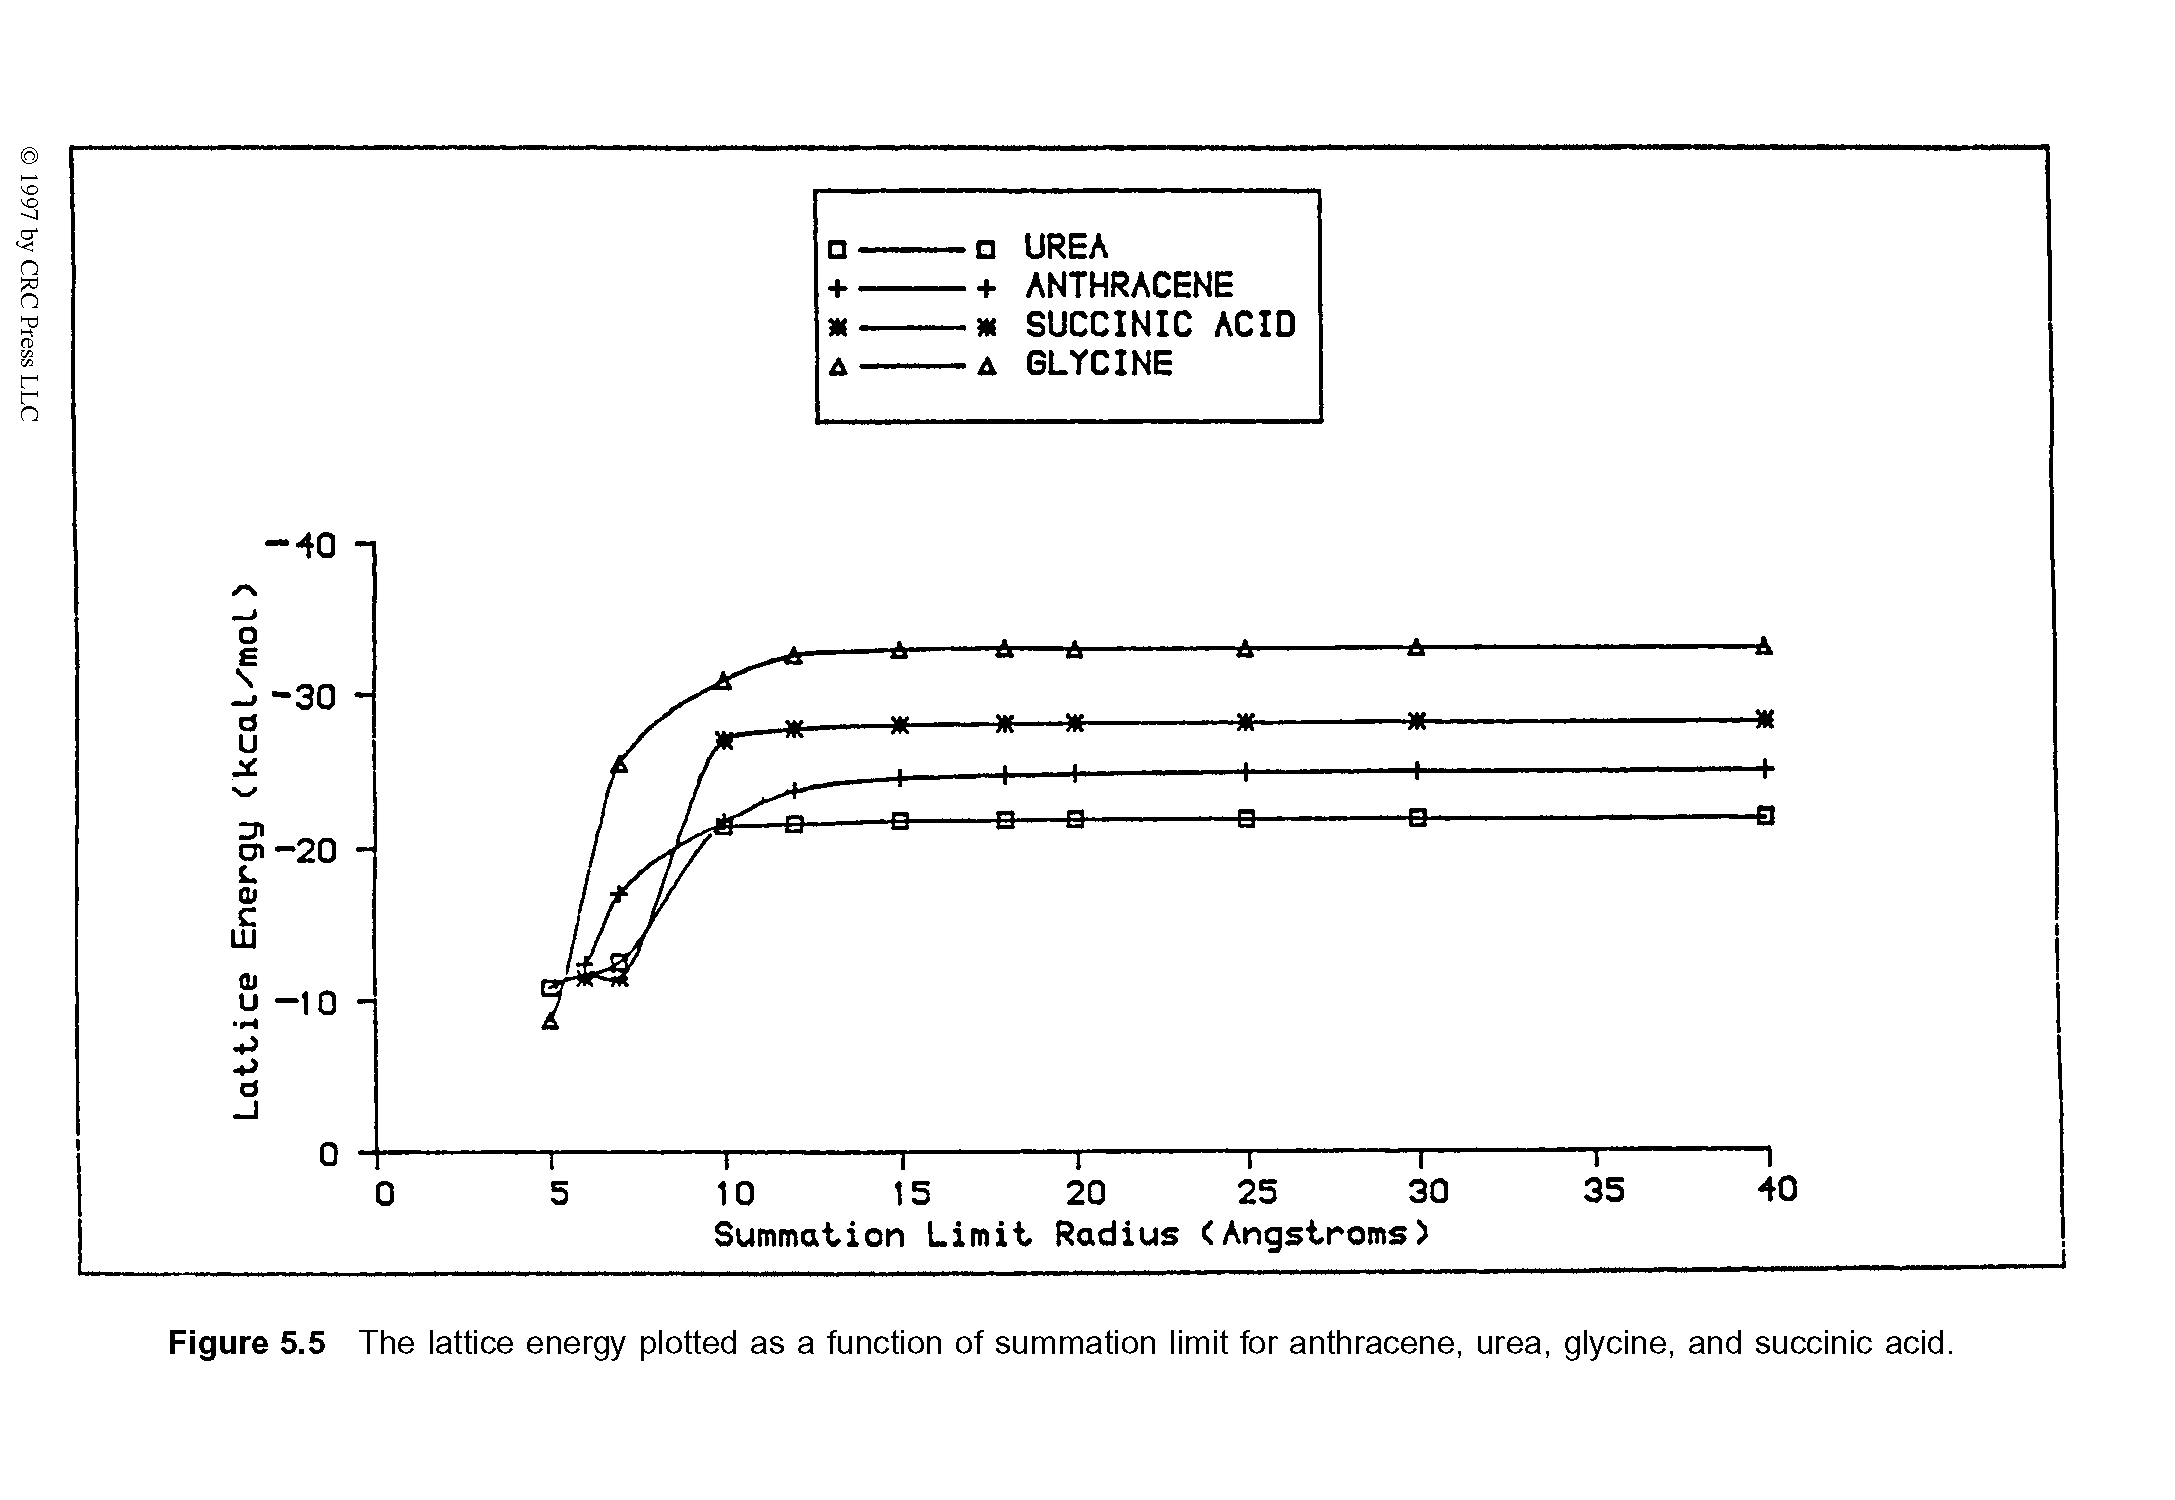 Figure 5.5 The lattice energy plotted as a function of summation limit for anthracene, urea, glycine, and succinic acid.